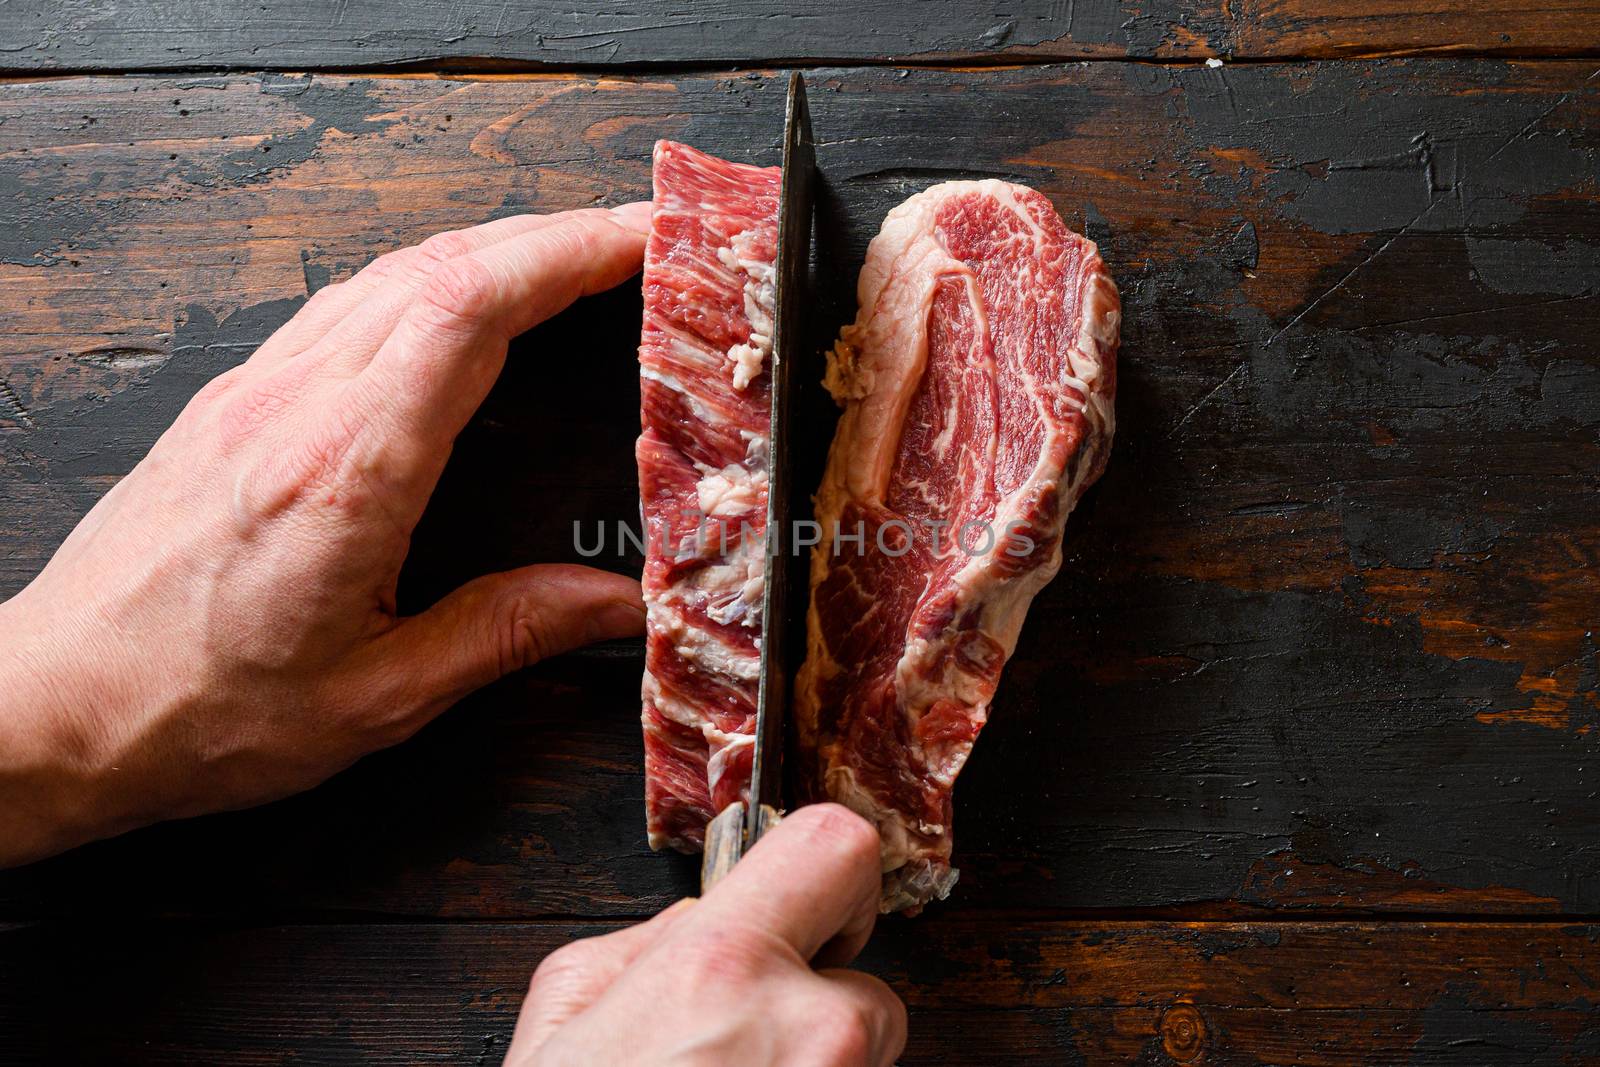 Chuck eye roll steak with butcher hands man cut meat with meat cleaver. Organic beef. at work chop. over dark wooden plank background Space for text.